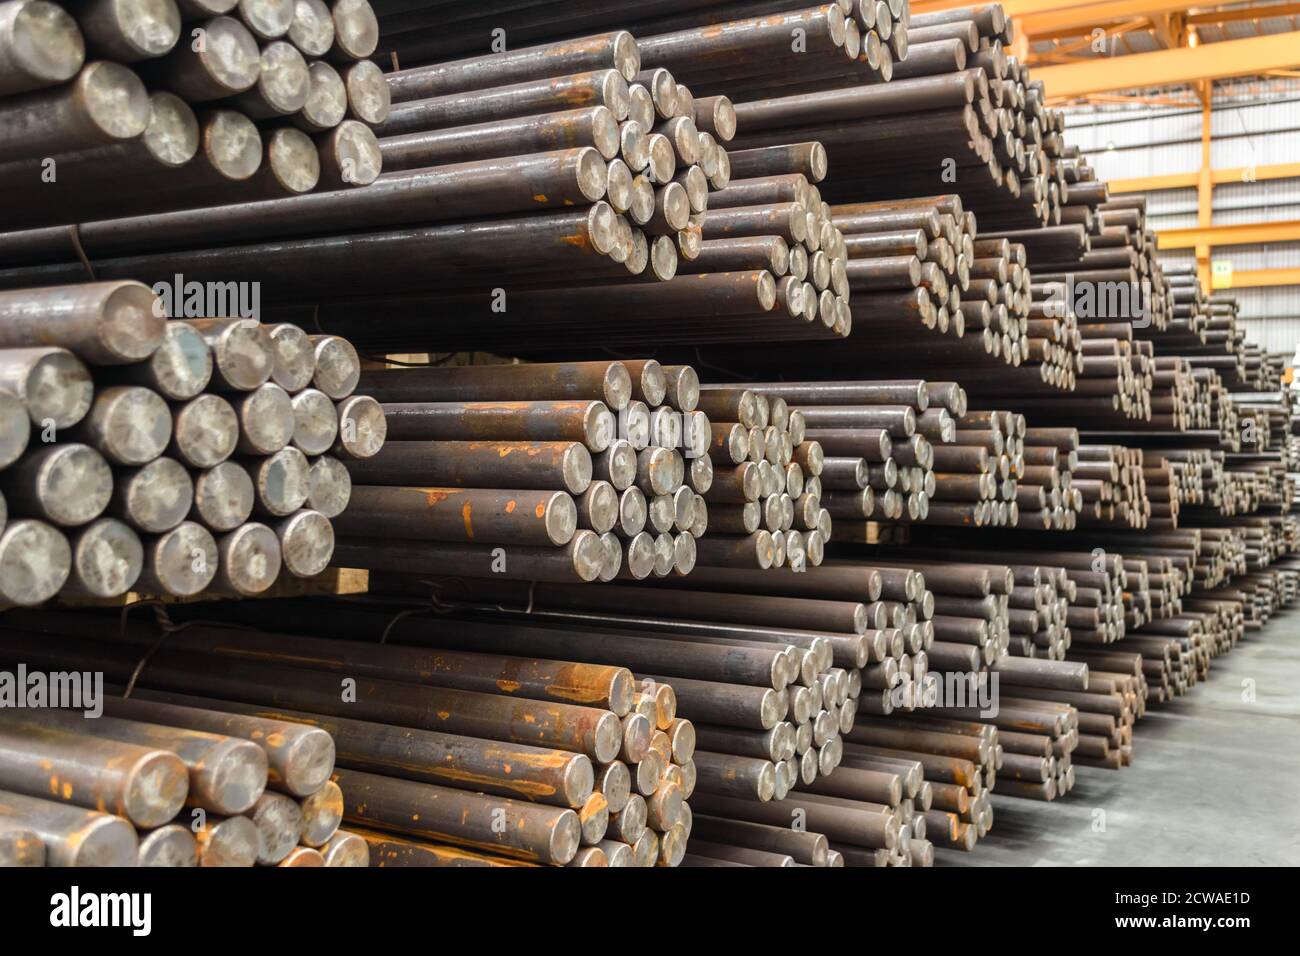 Steel round bar storage and stacking in warehouse. Stock Photo